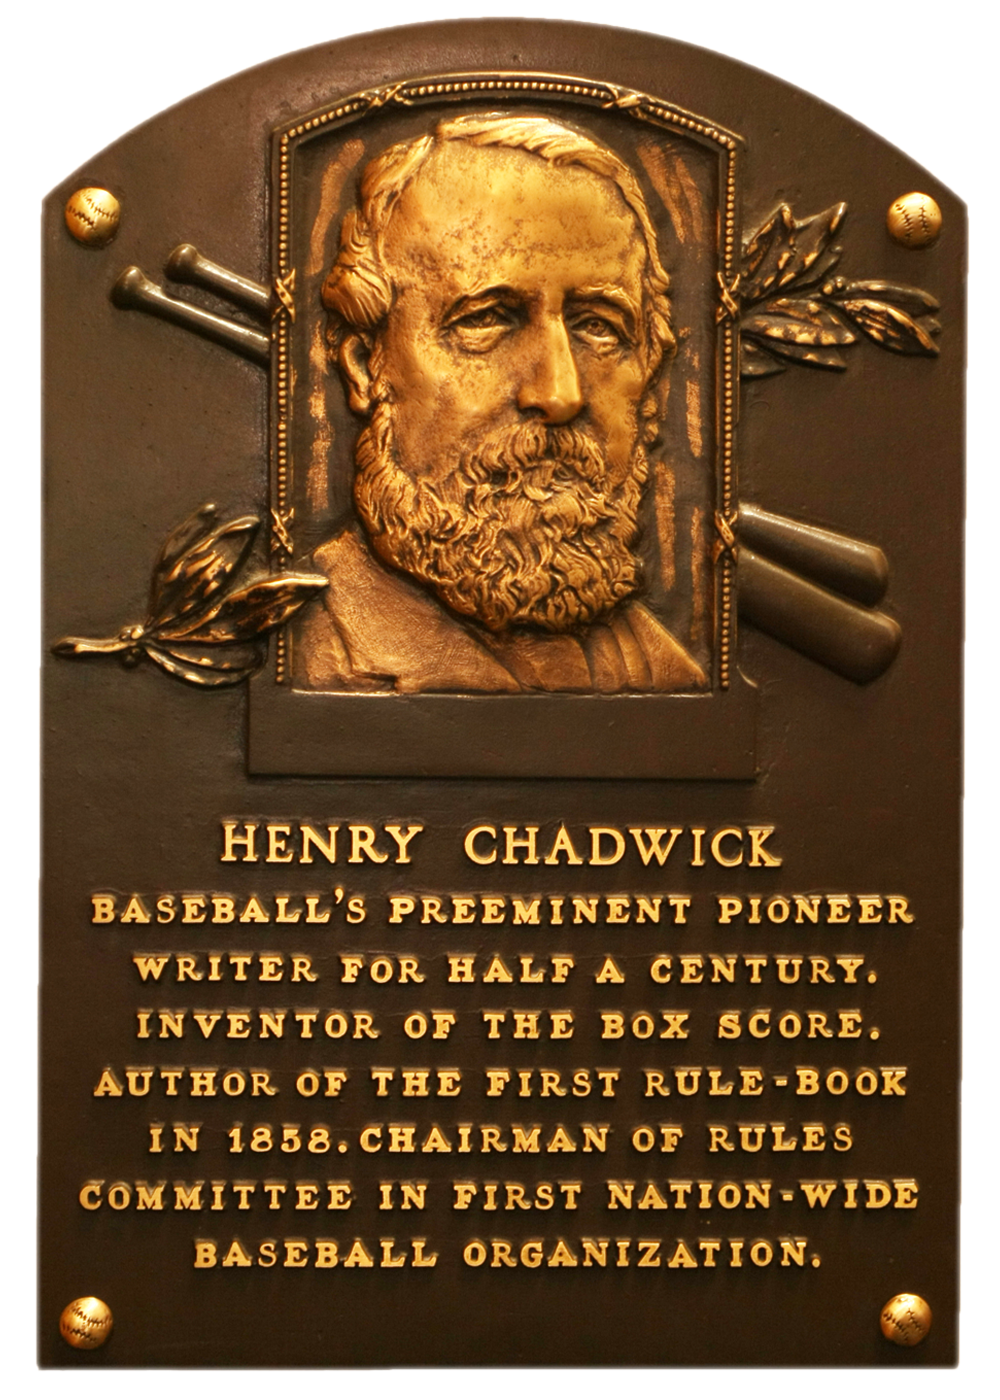 Henry Chadwick Hall of Fame plaque